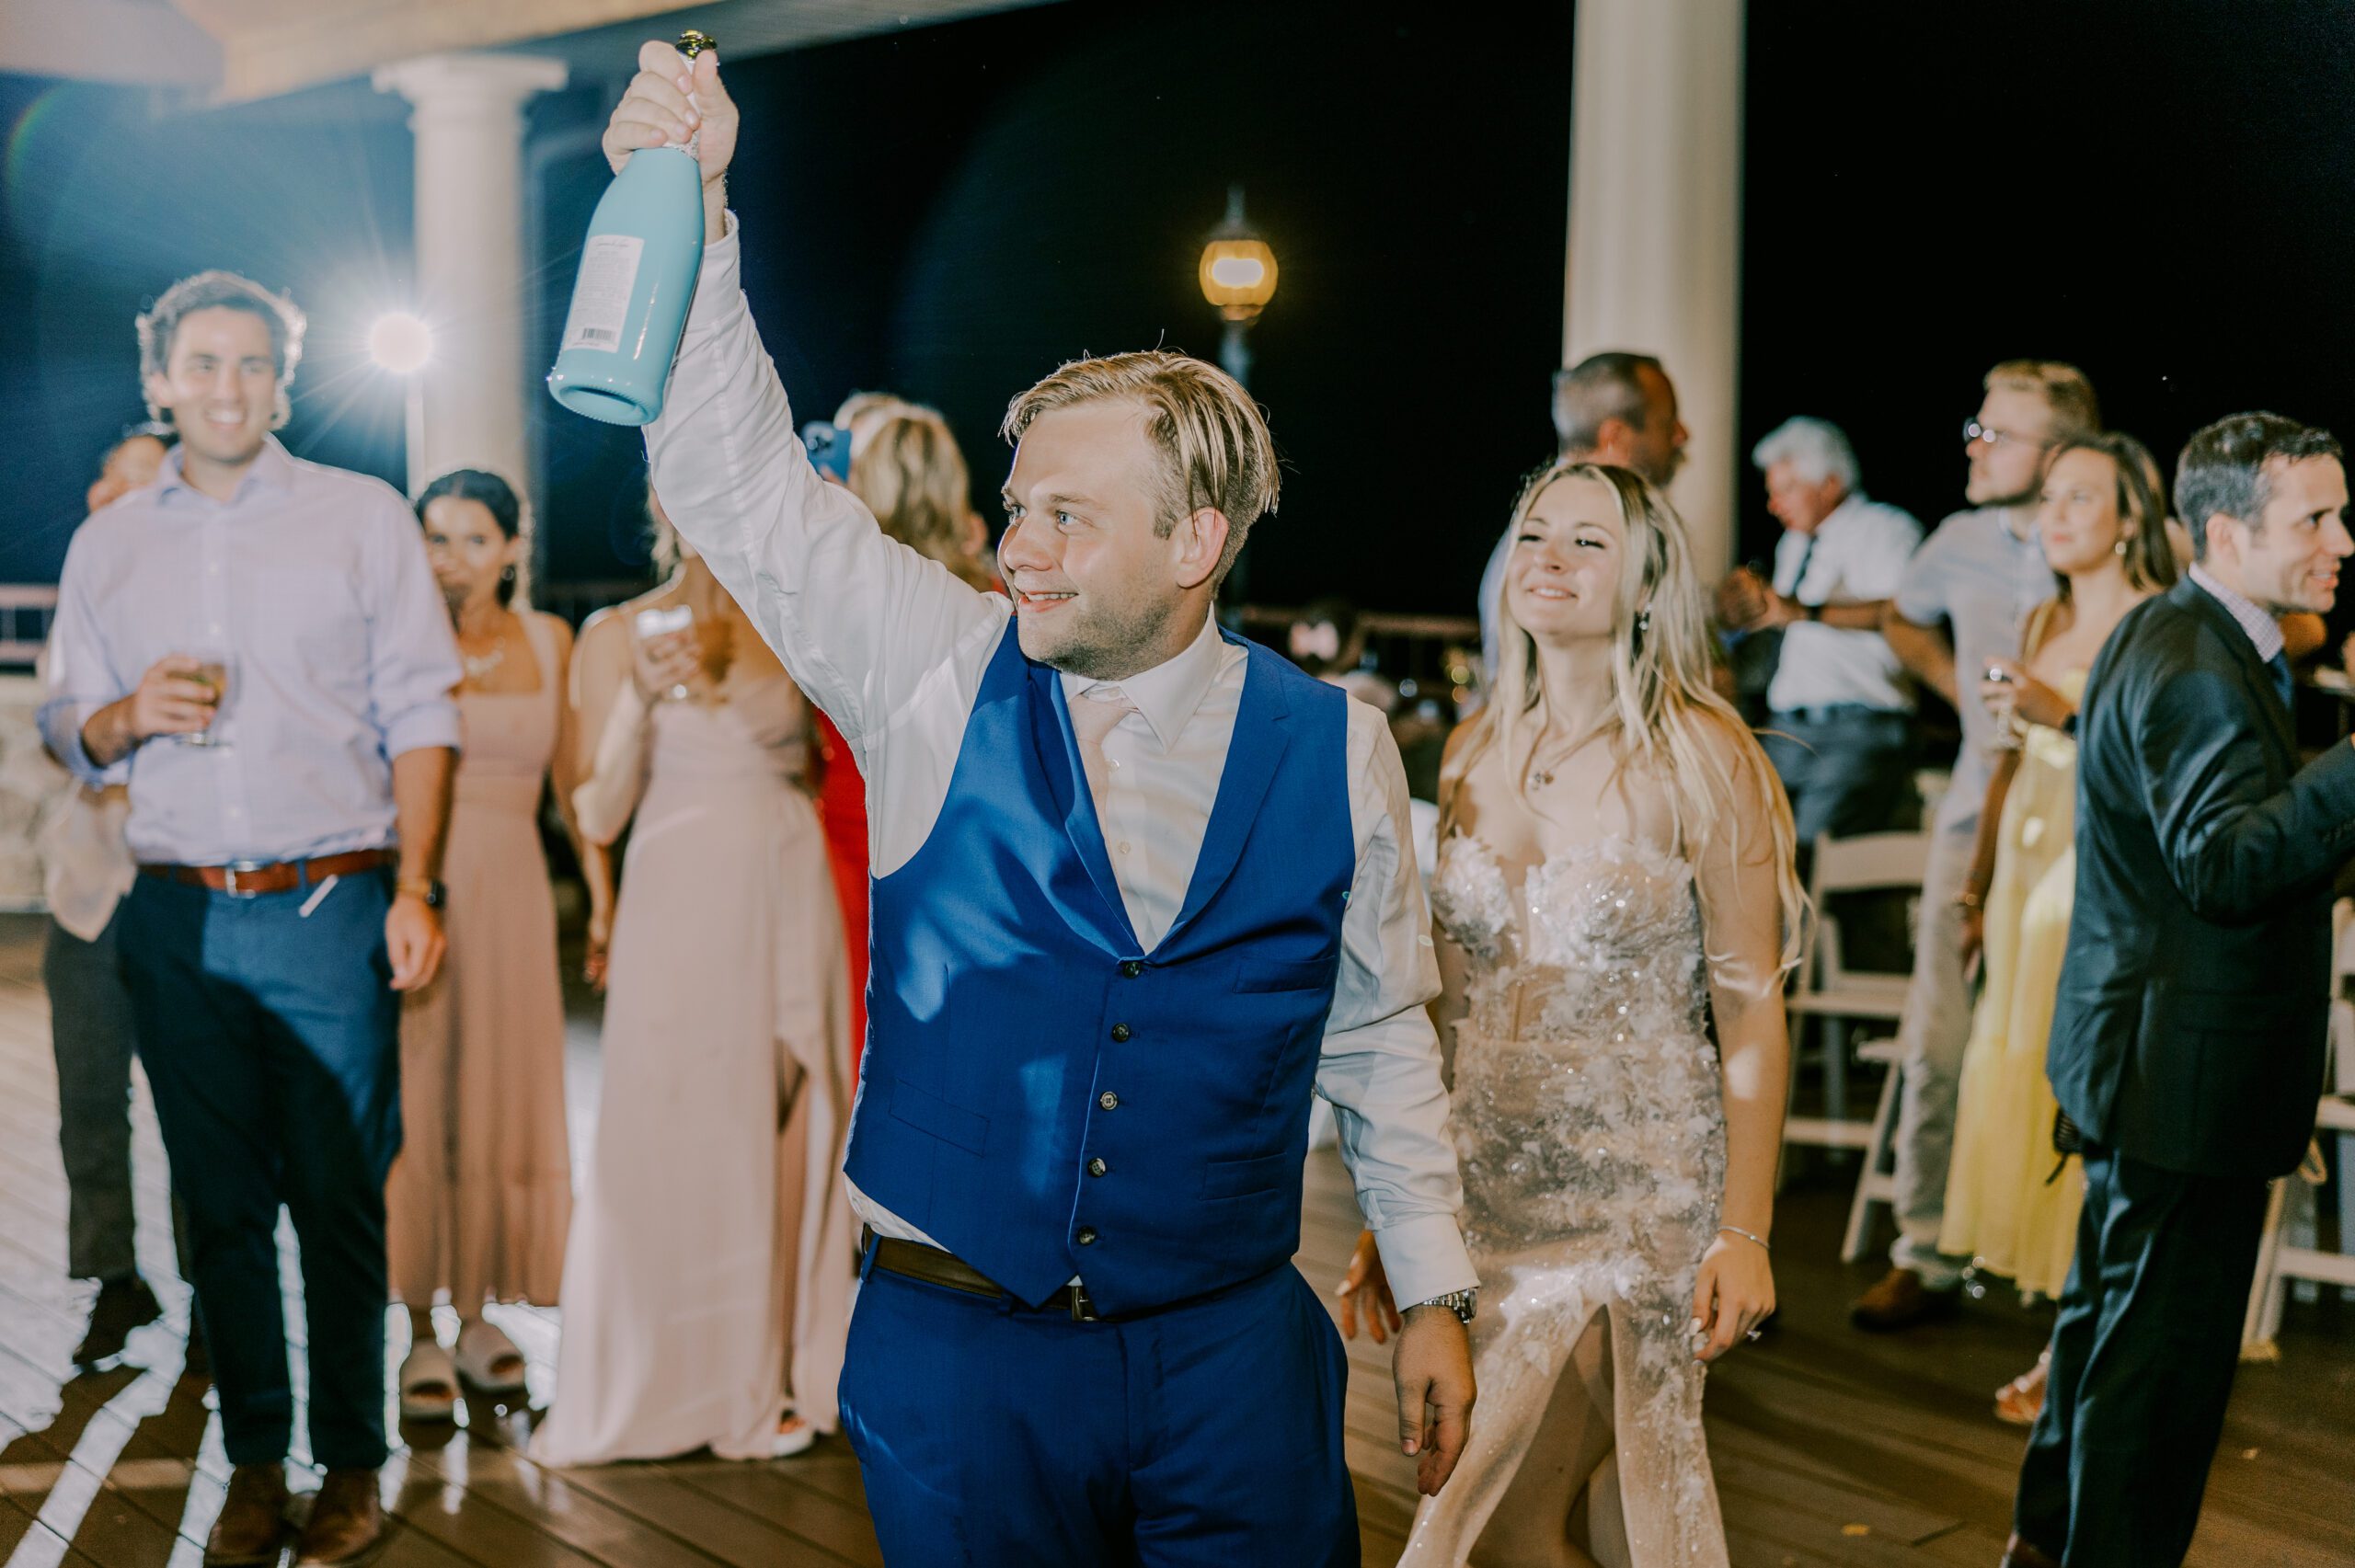 Groom dancing at his reception with bride, and other guests in background